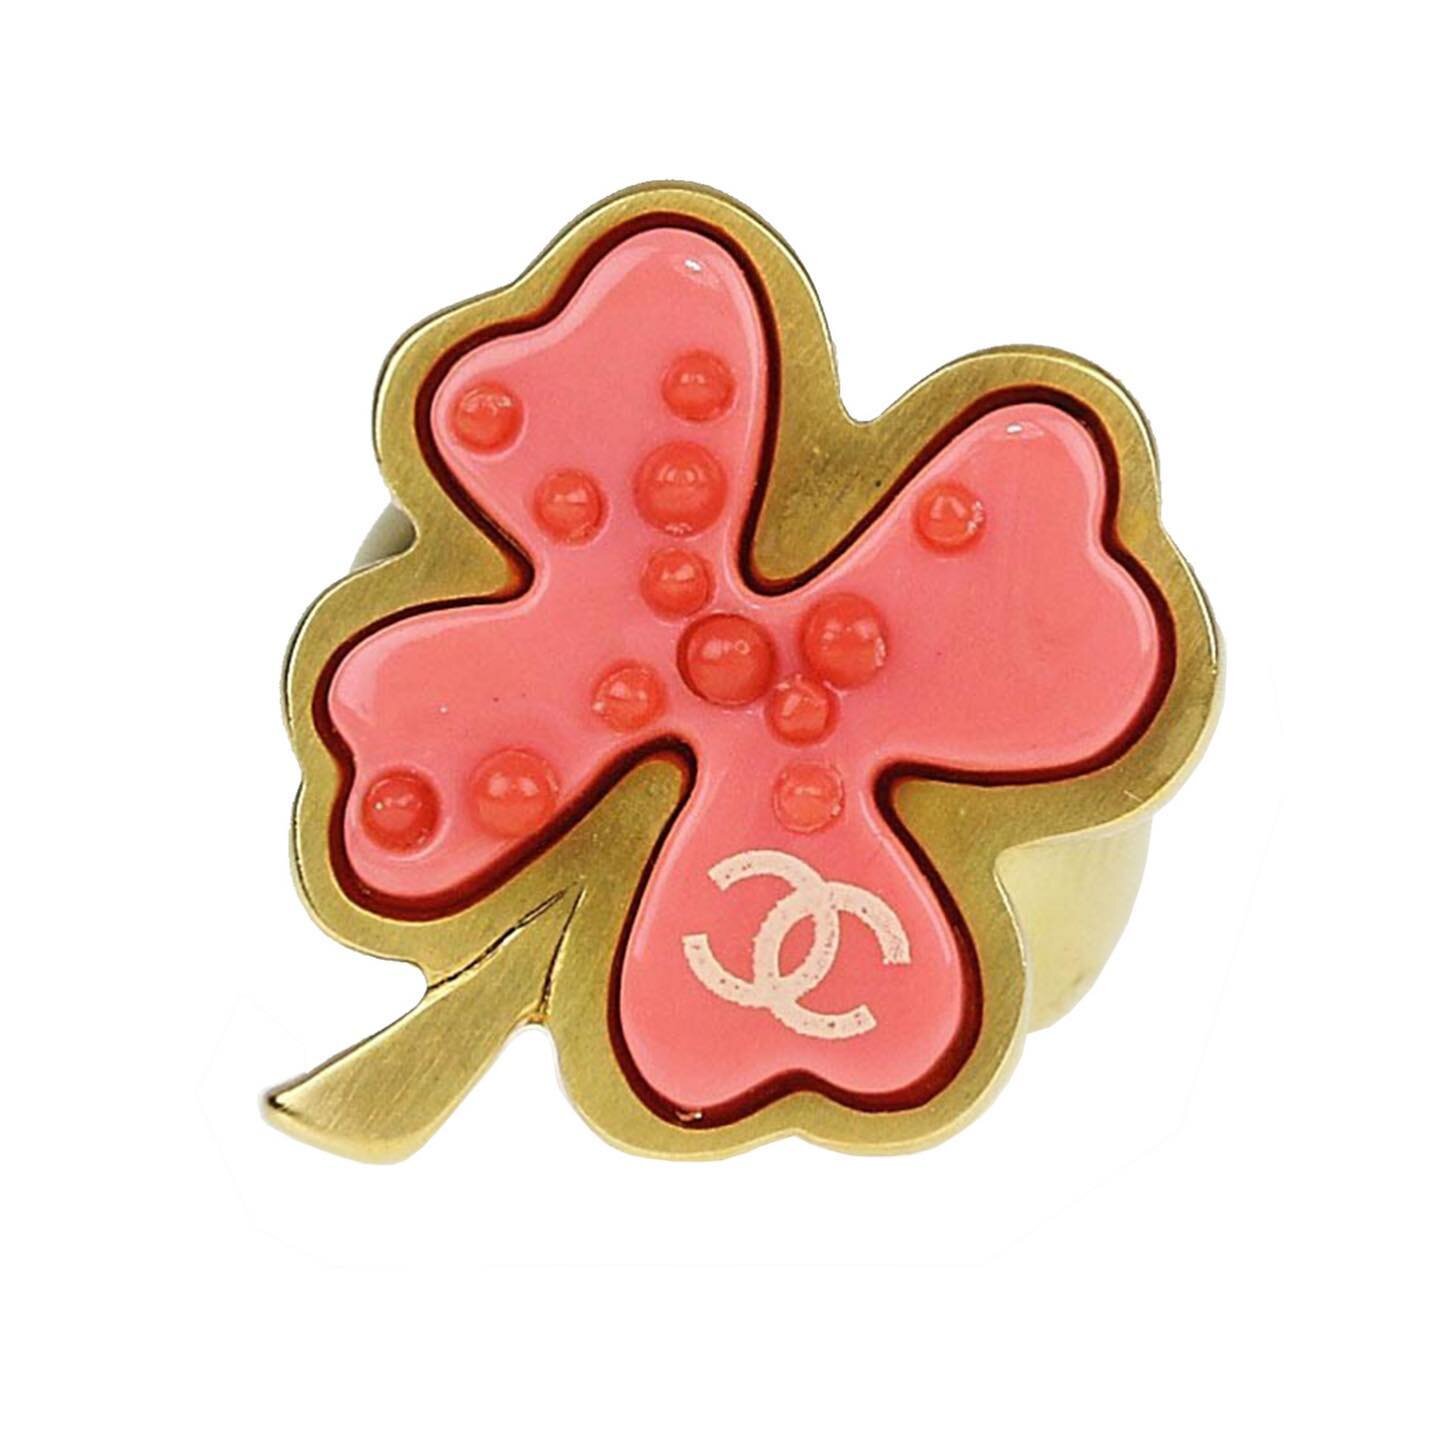 Just in time for March! Chanel gold-tone metal ring with four leaf clover silhouette.🍀

DM for more info! 🛒